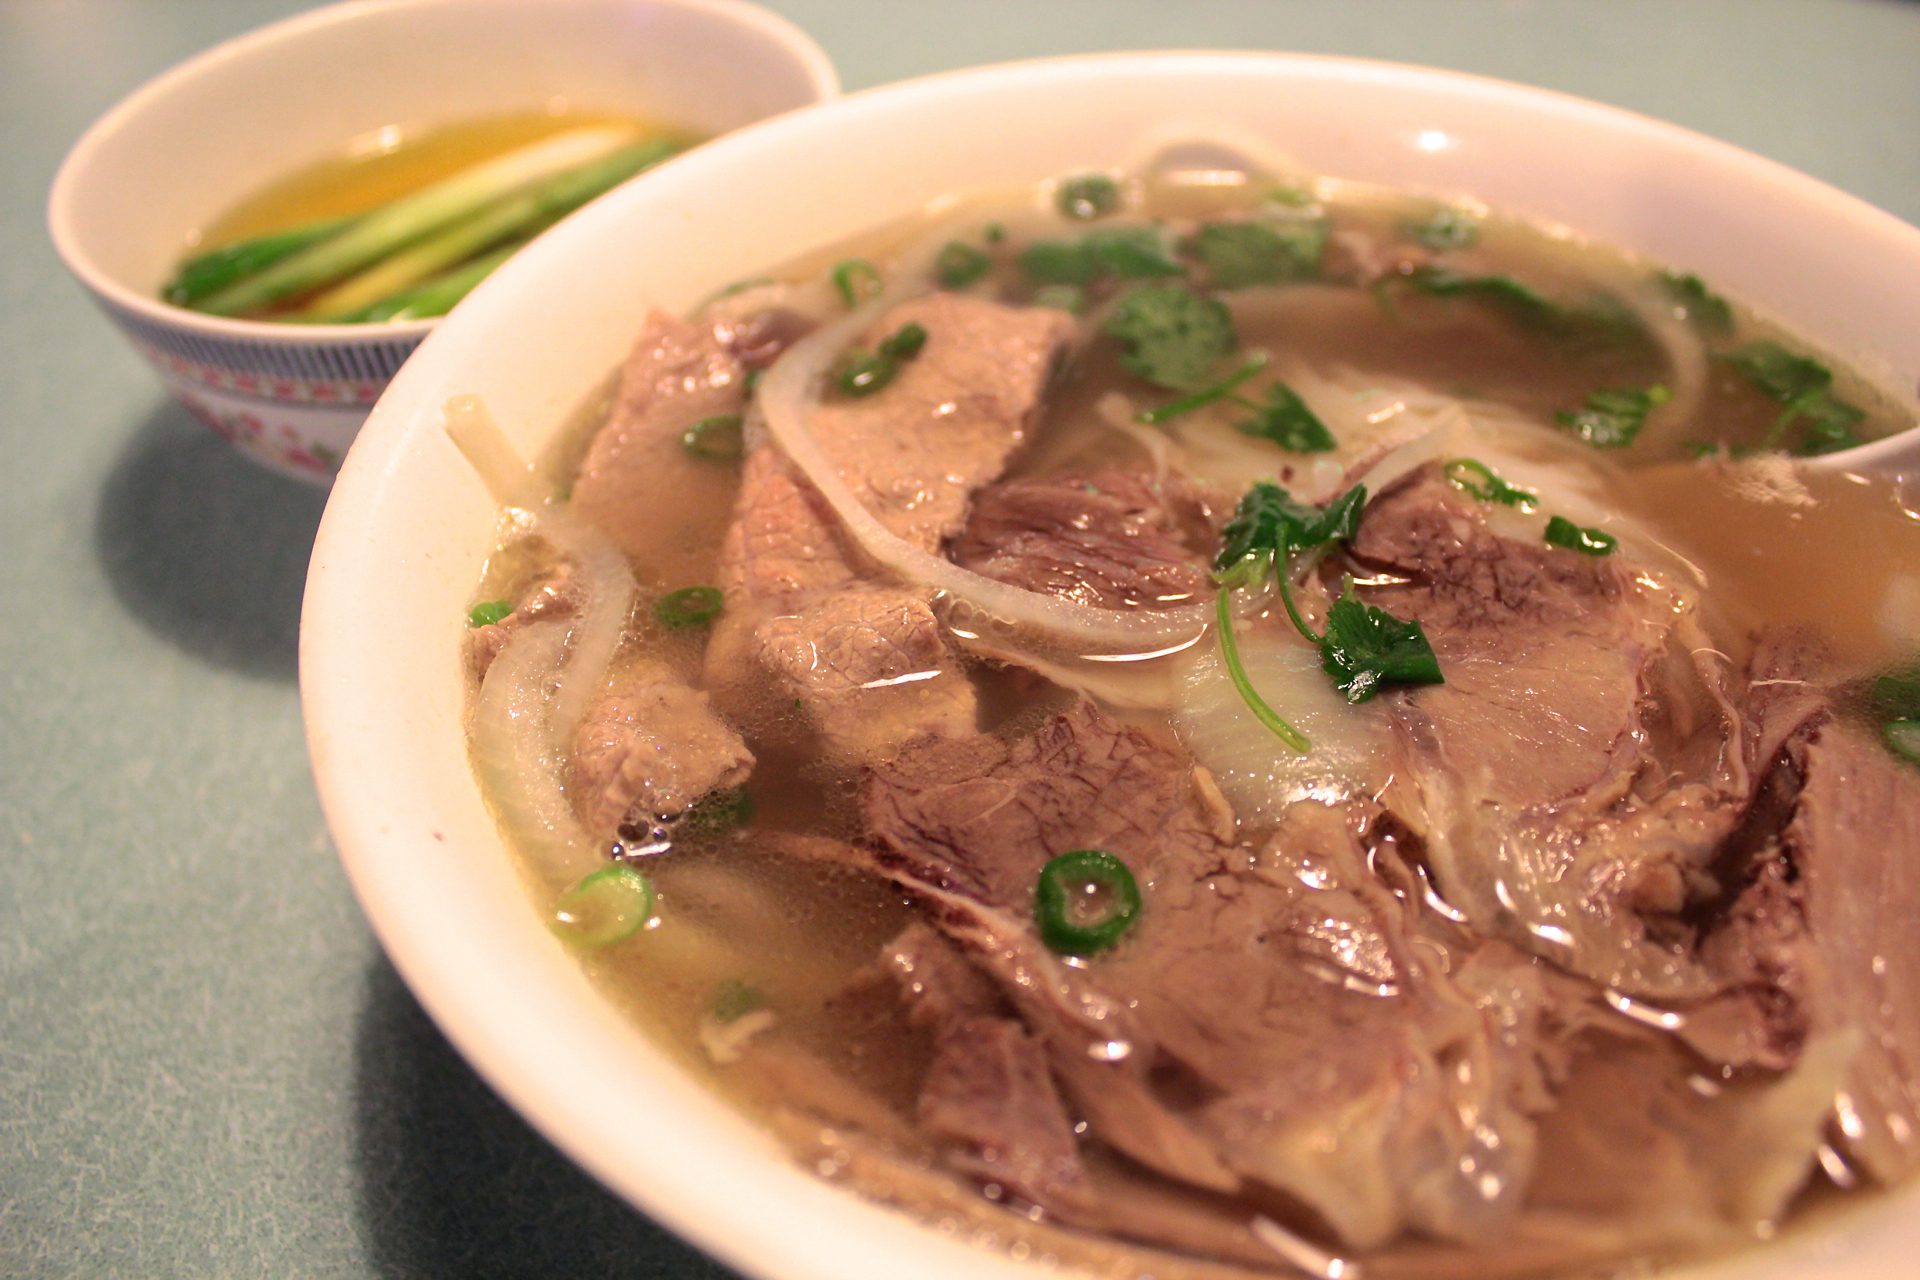 The house special pho at Pho Nam in Sunnyvale with steak, lean brisket, flank, tendon and tripe.